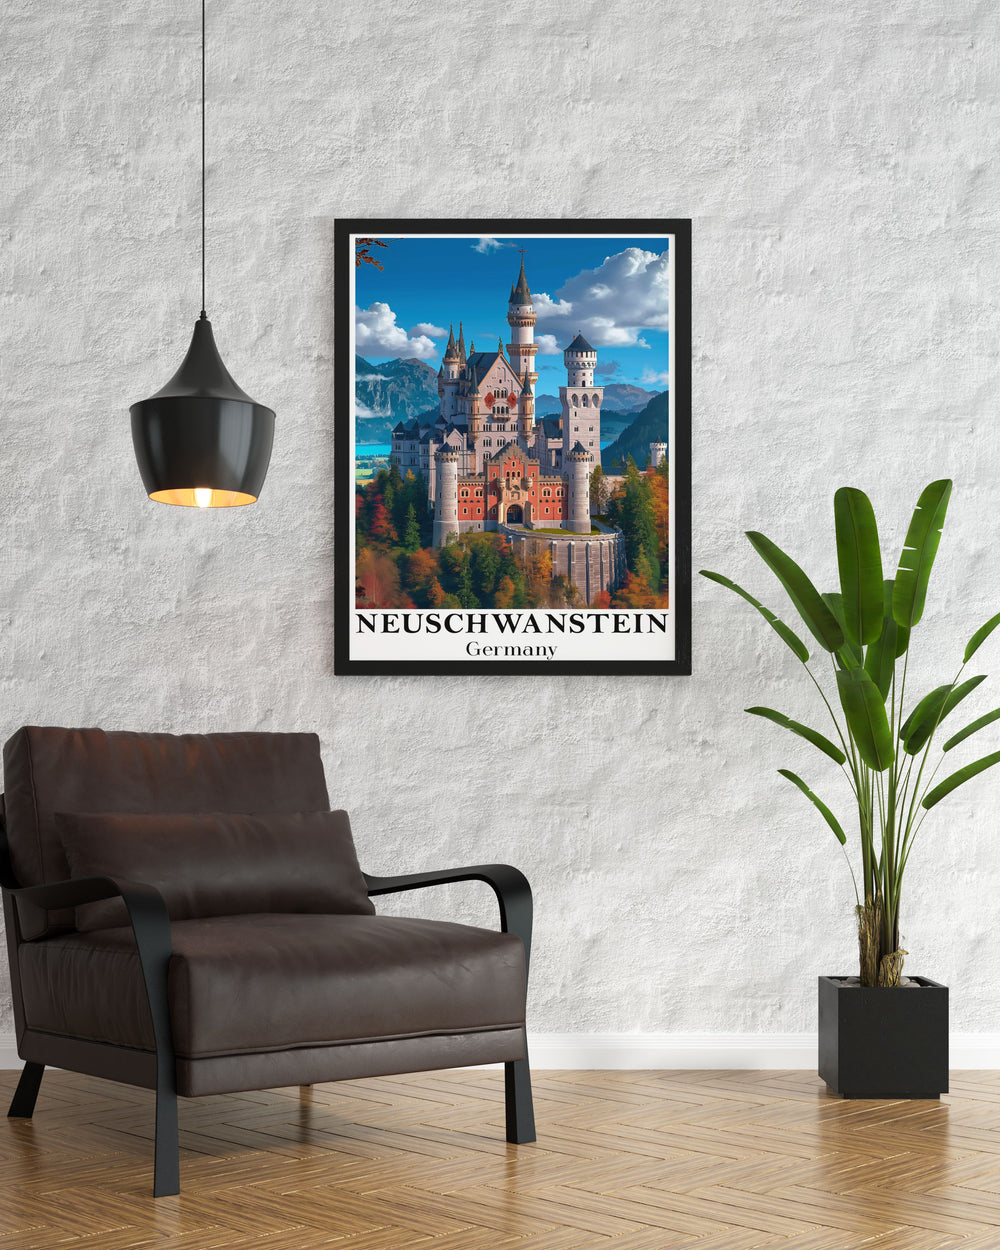 Elegant Neuschwanstein Castle prints offering a sophisticated touch to any living space. These fine line prints are perfect for enhancing your home decor with a touch of history and artistry.